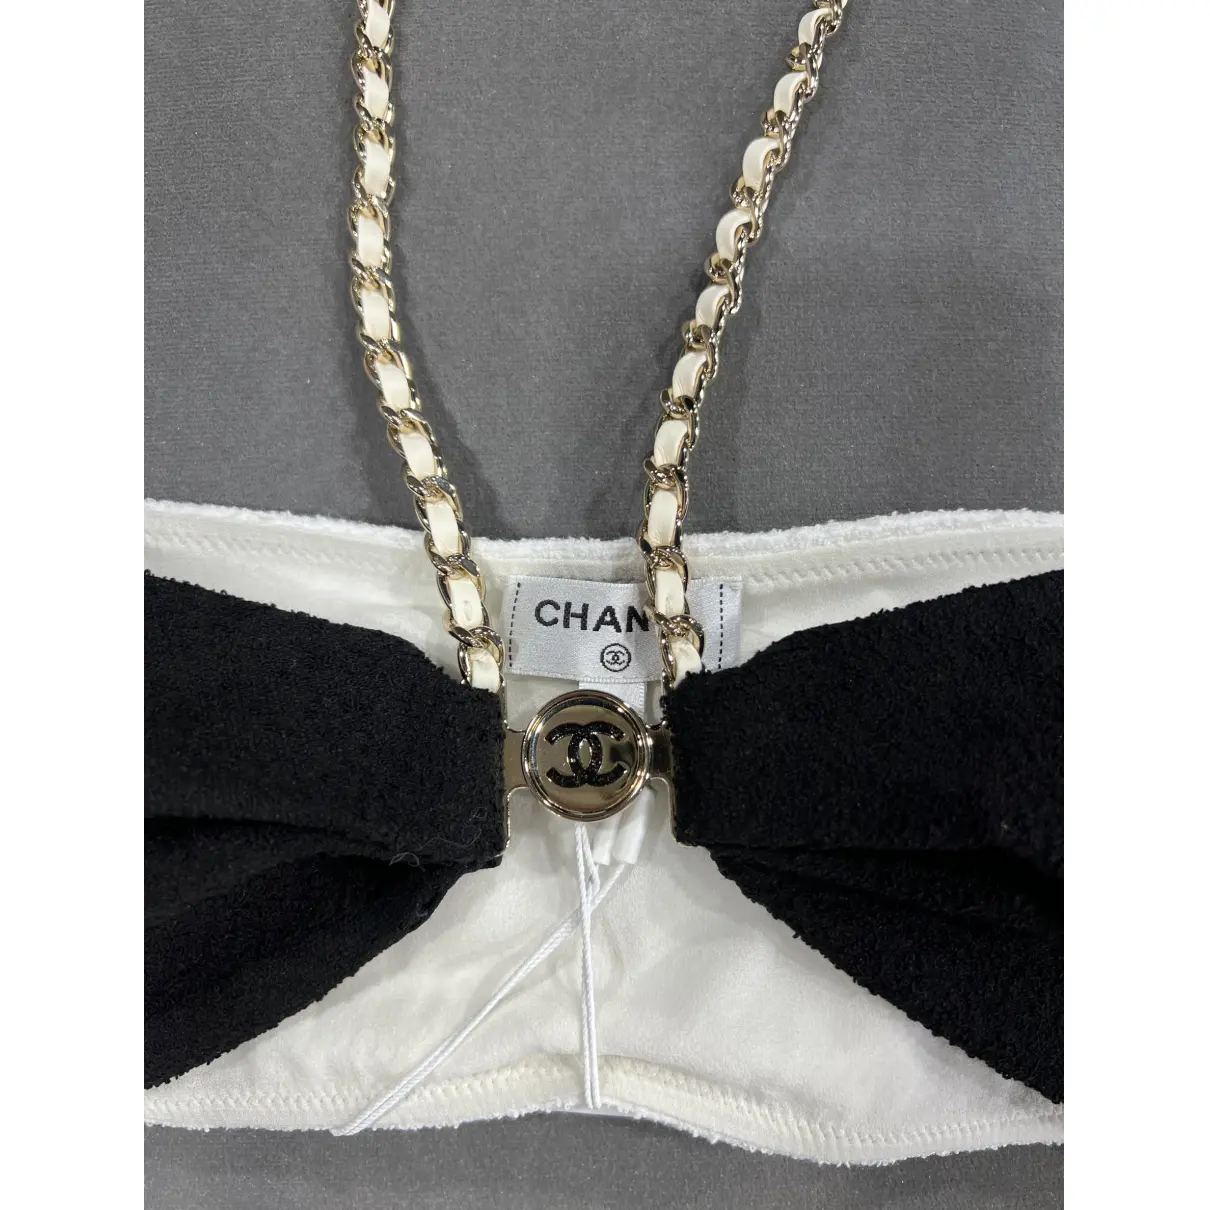 Camisole Chanel